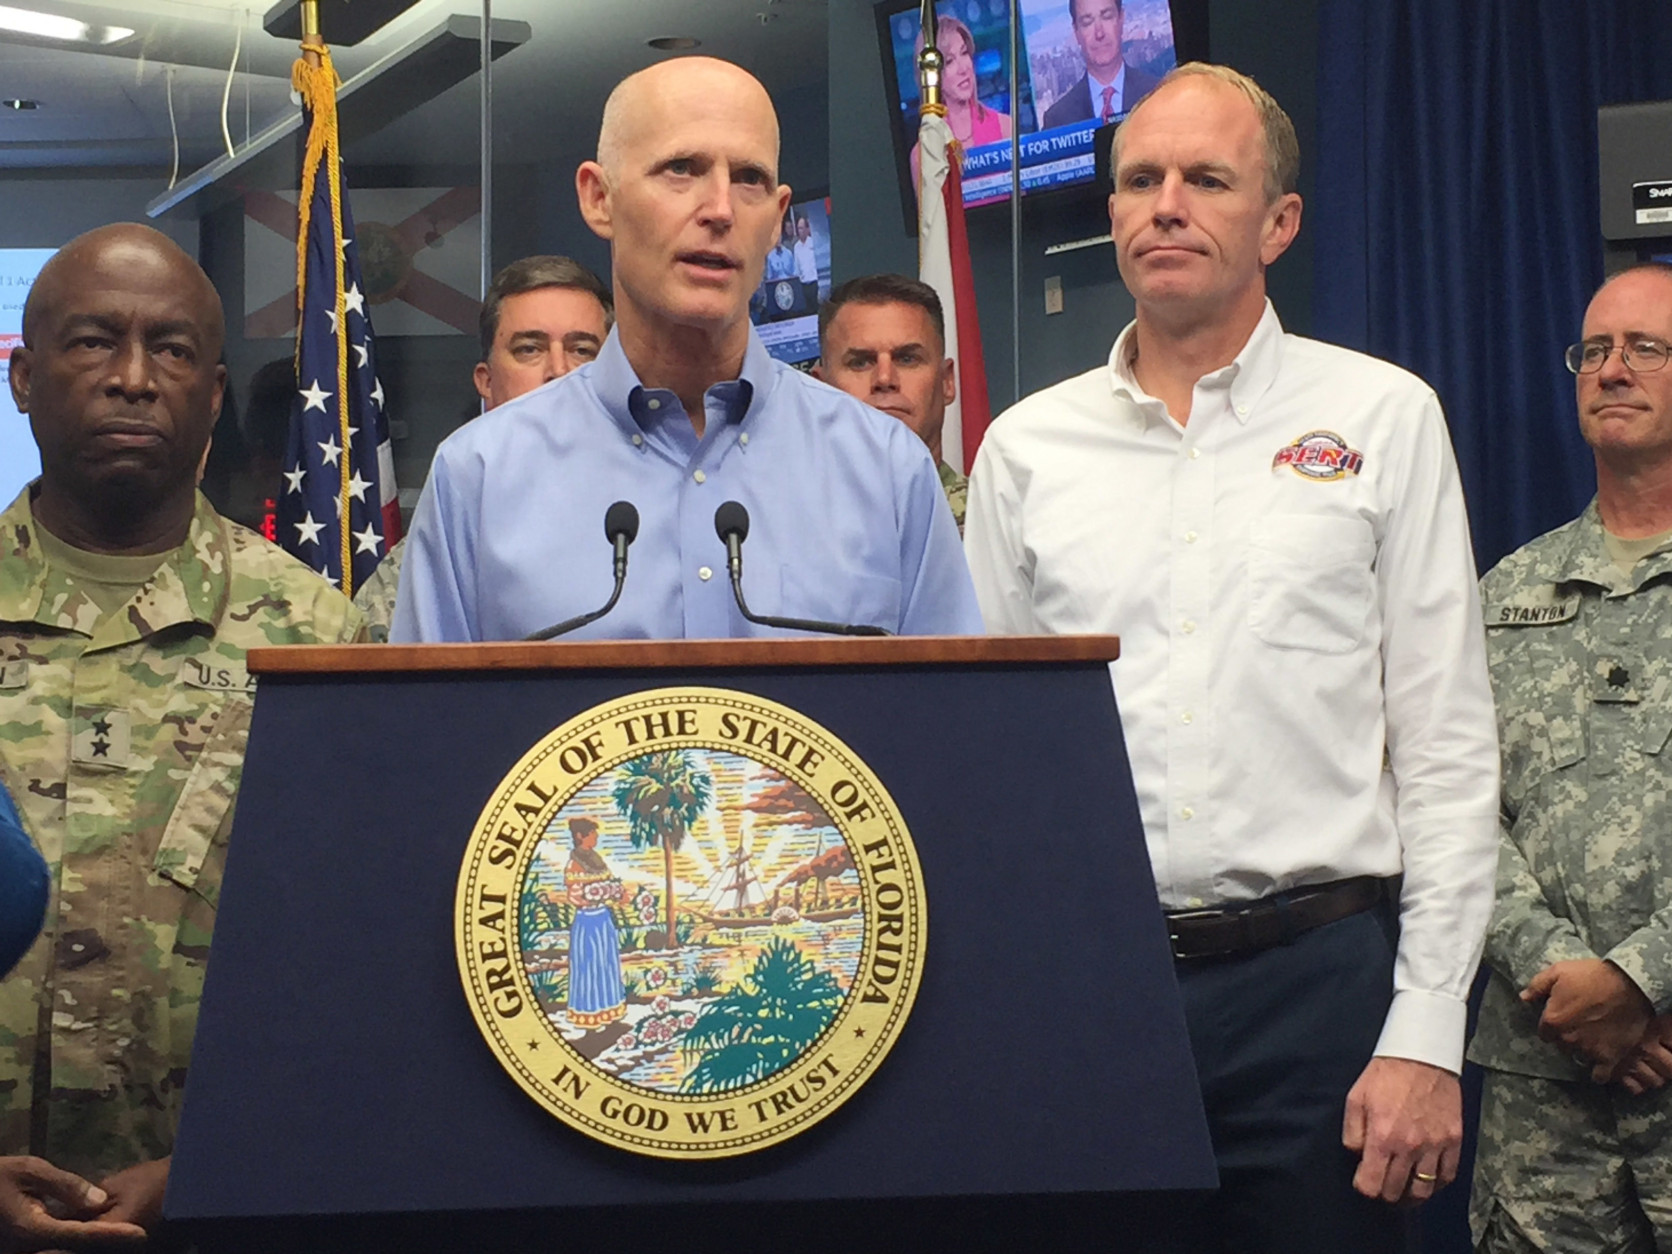 Florida Gov. Rick Scott, center, and Florida Emergency Management Director Bryan Koon, right, give an update on Tropical Storm Hermine at the State Disaster Operations Center in Tallahassee, Fla., on Thursday, Sept. 1, 2016. Scott says Tropical Storm Hermine is potentially life-threatening, and he's urging Gulf Coast residents to take precautions immediately.
(AP Photo/Joe Reedy)